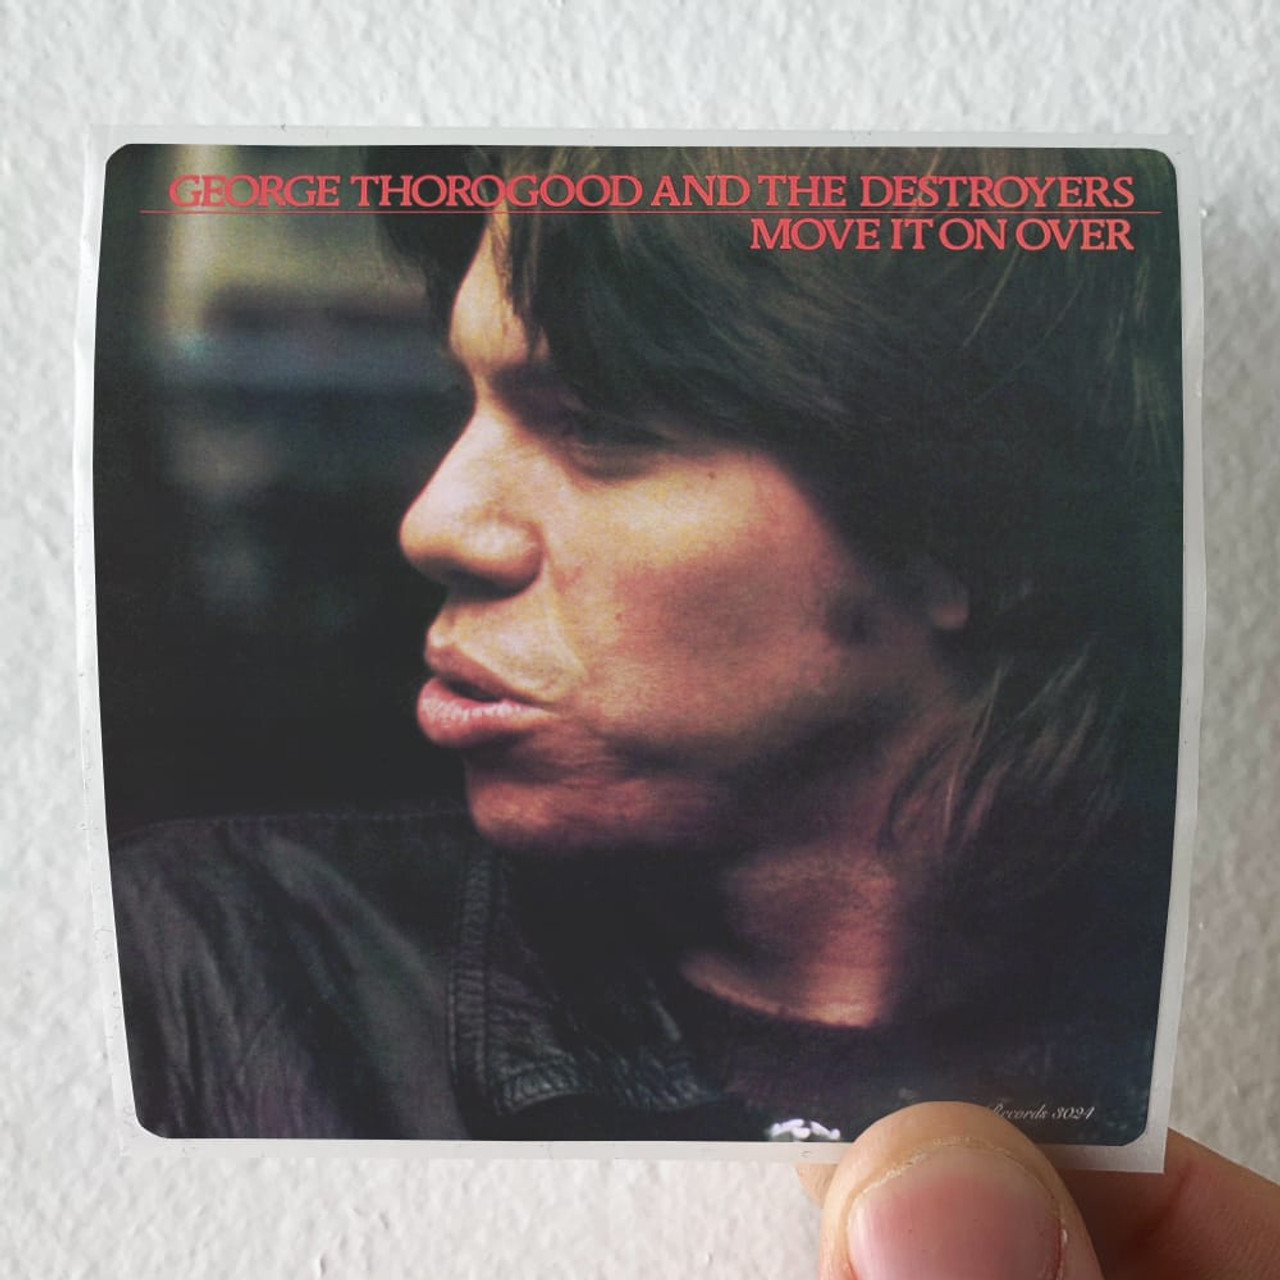 George Thorogood and The Destroyers Move It On Over Album Cover Sticker